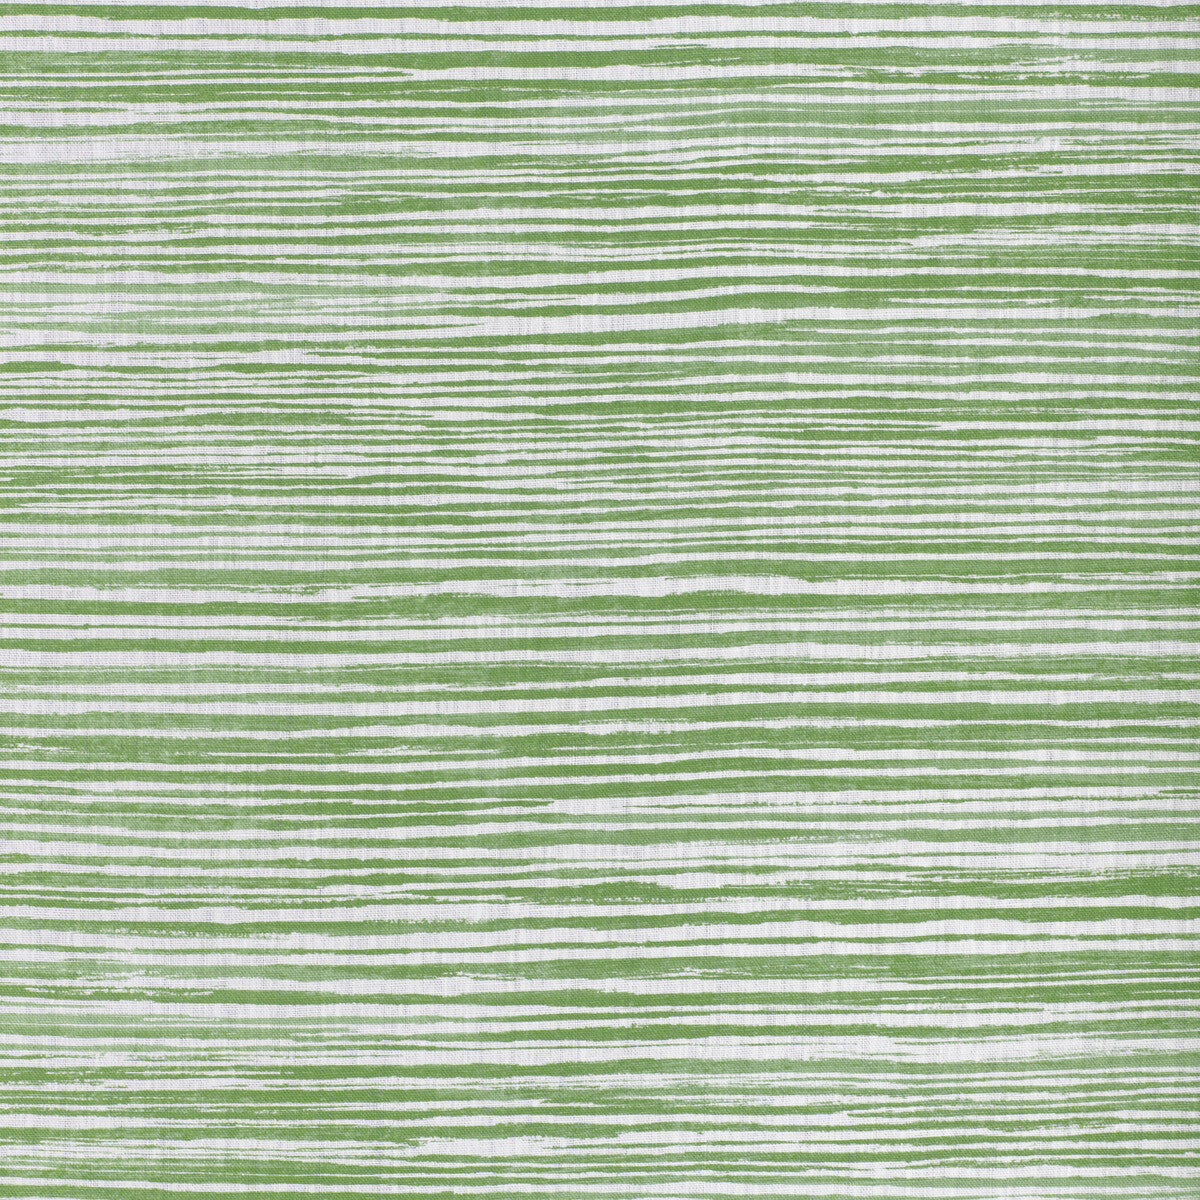 Landlines fabric in grass color - pattern LANDLINES.30.0 - by Kravet Basics in the Small Scale Prints collection